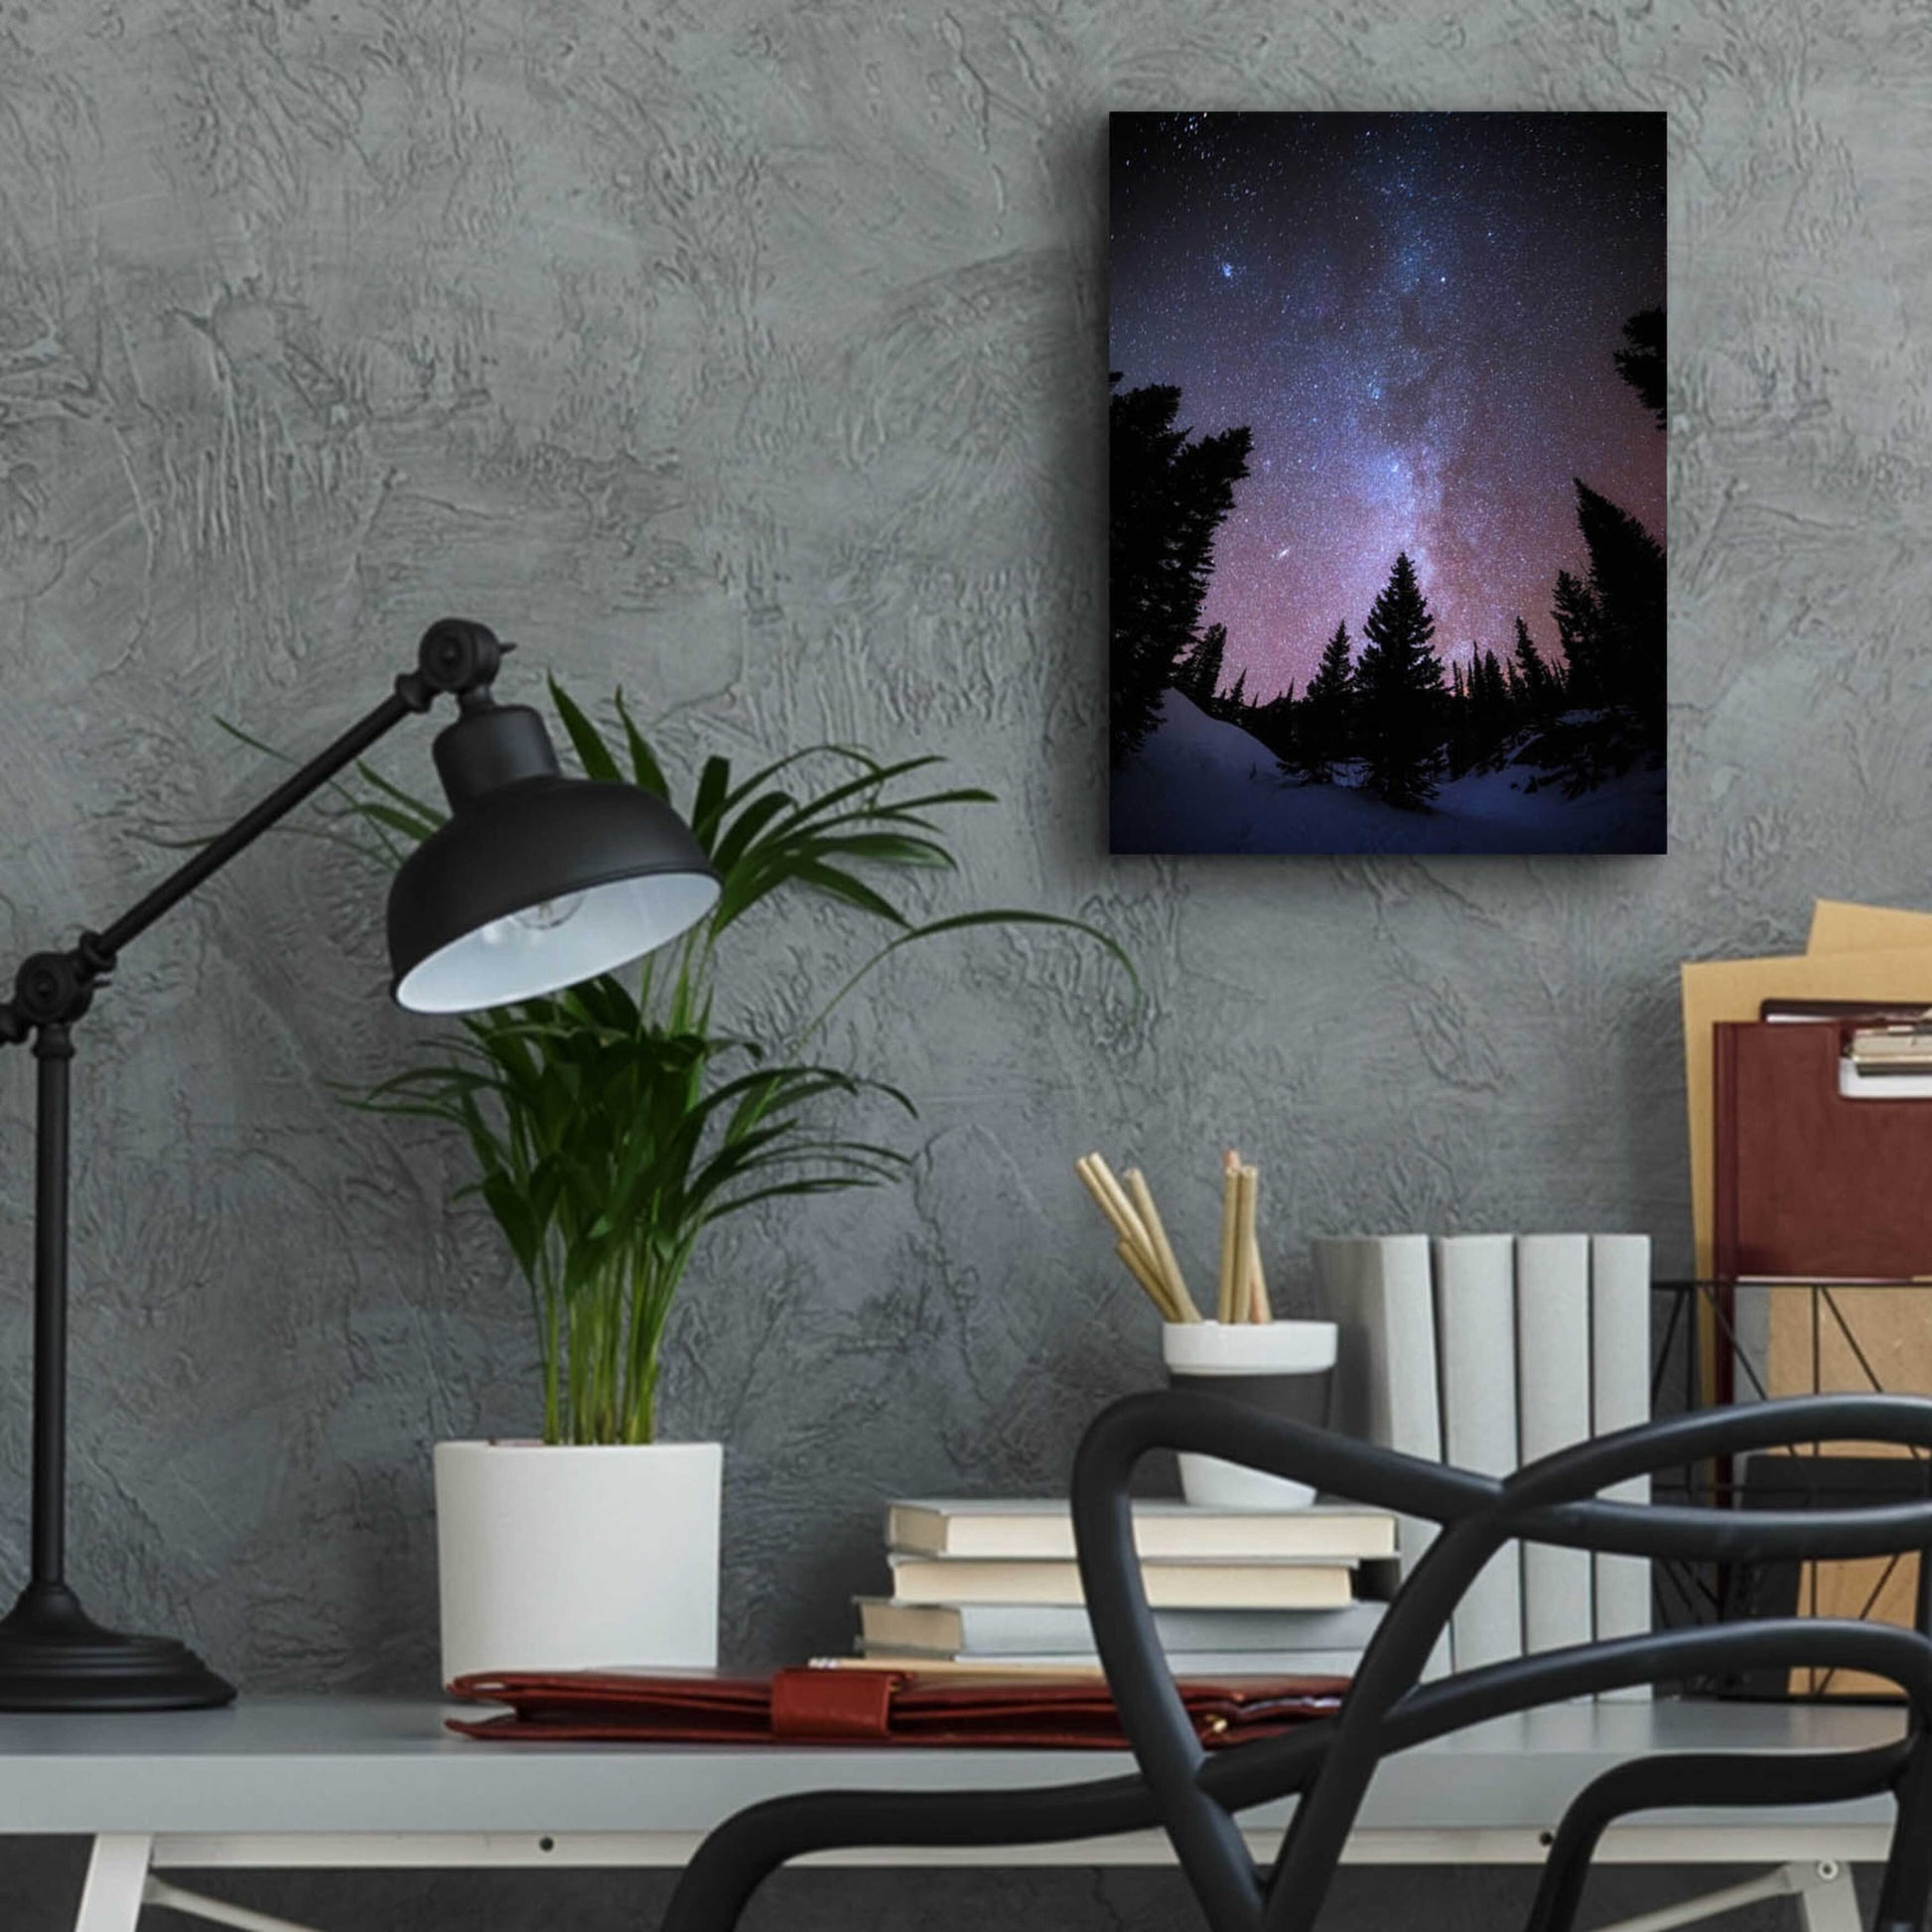 Epic Art 'Andromeda Our Neighbor - Rocky Mountain National Park' by Darren White, Acrylic Glass Wall Art,12x16